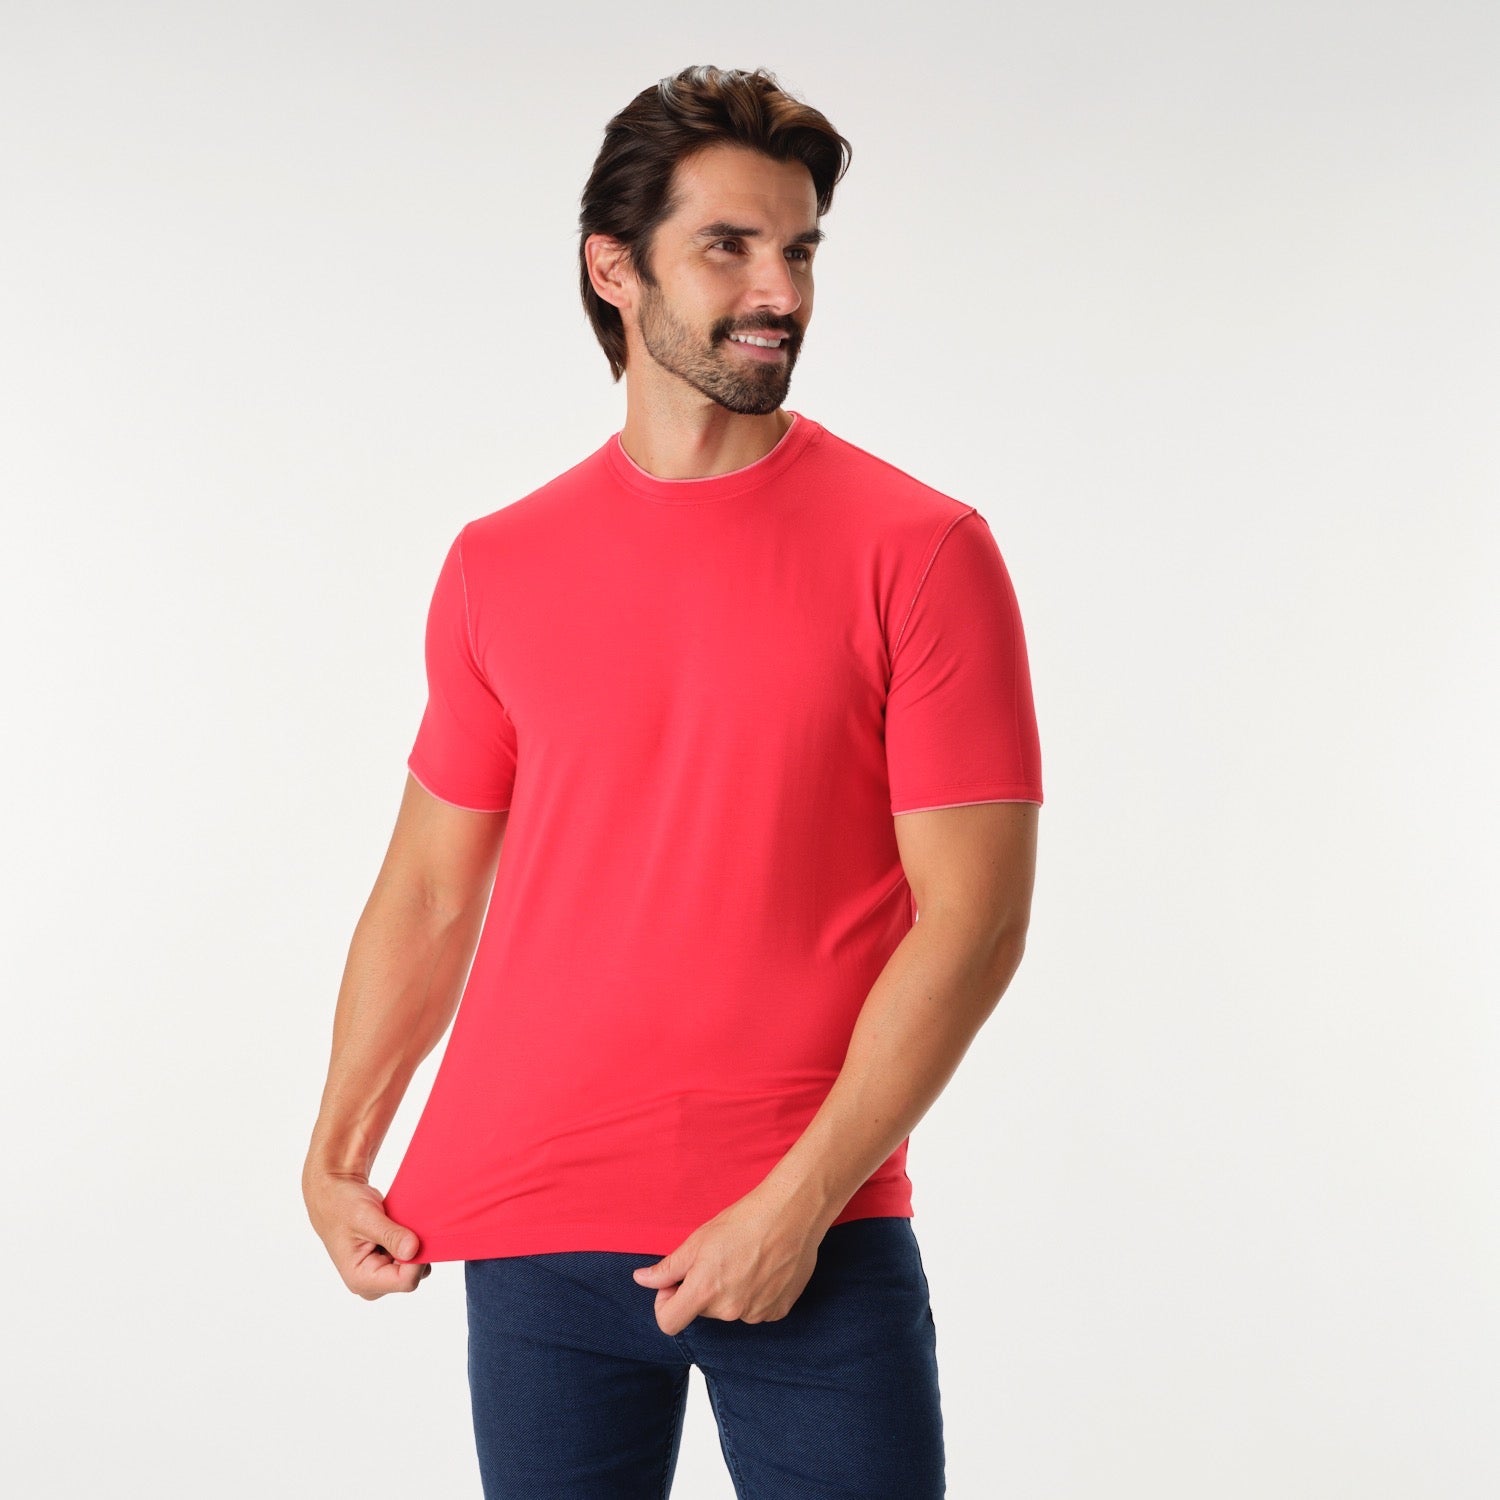 Solid Performance Red Stitched Crew Neck T-Shirt